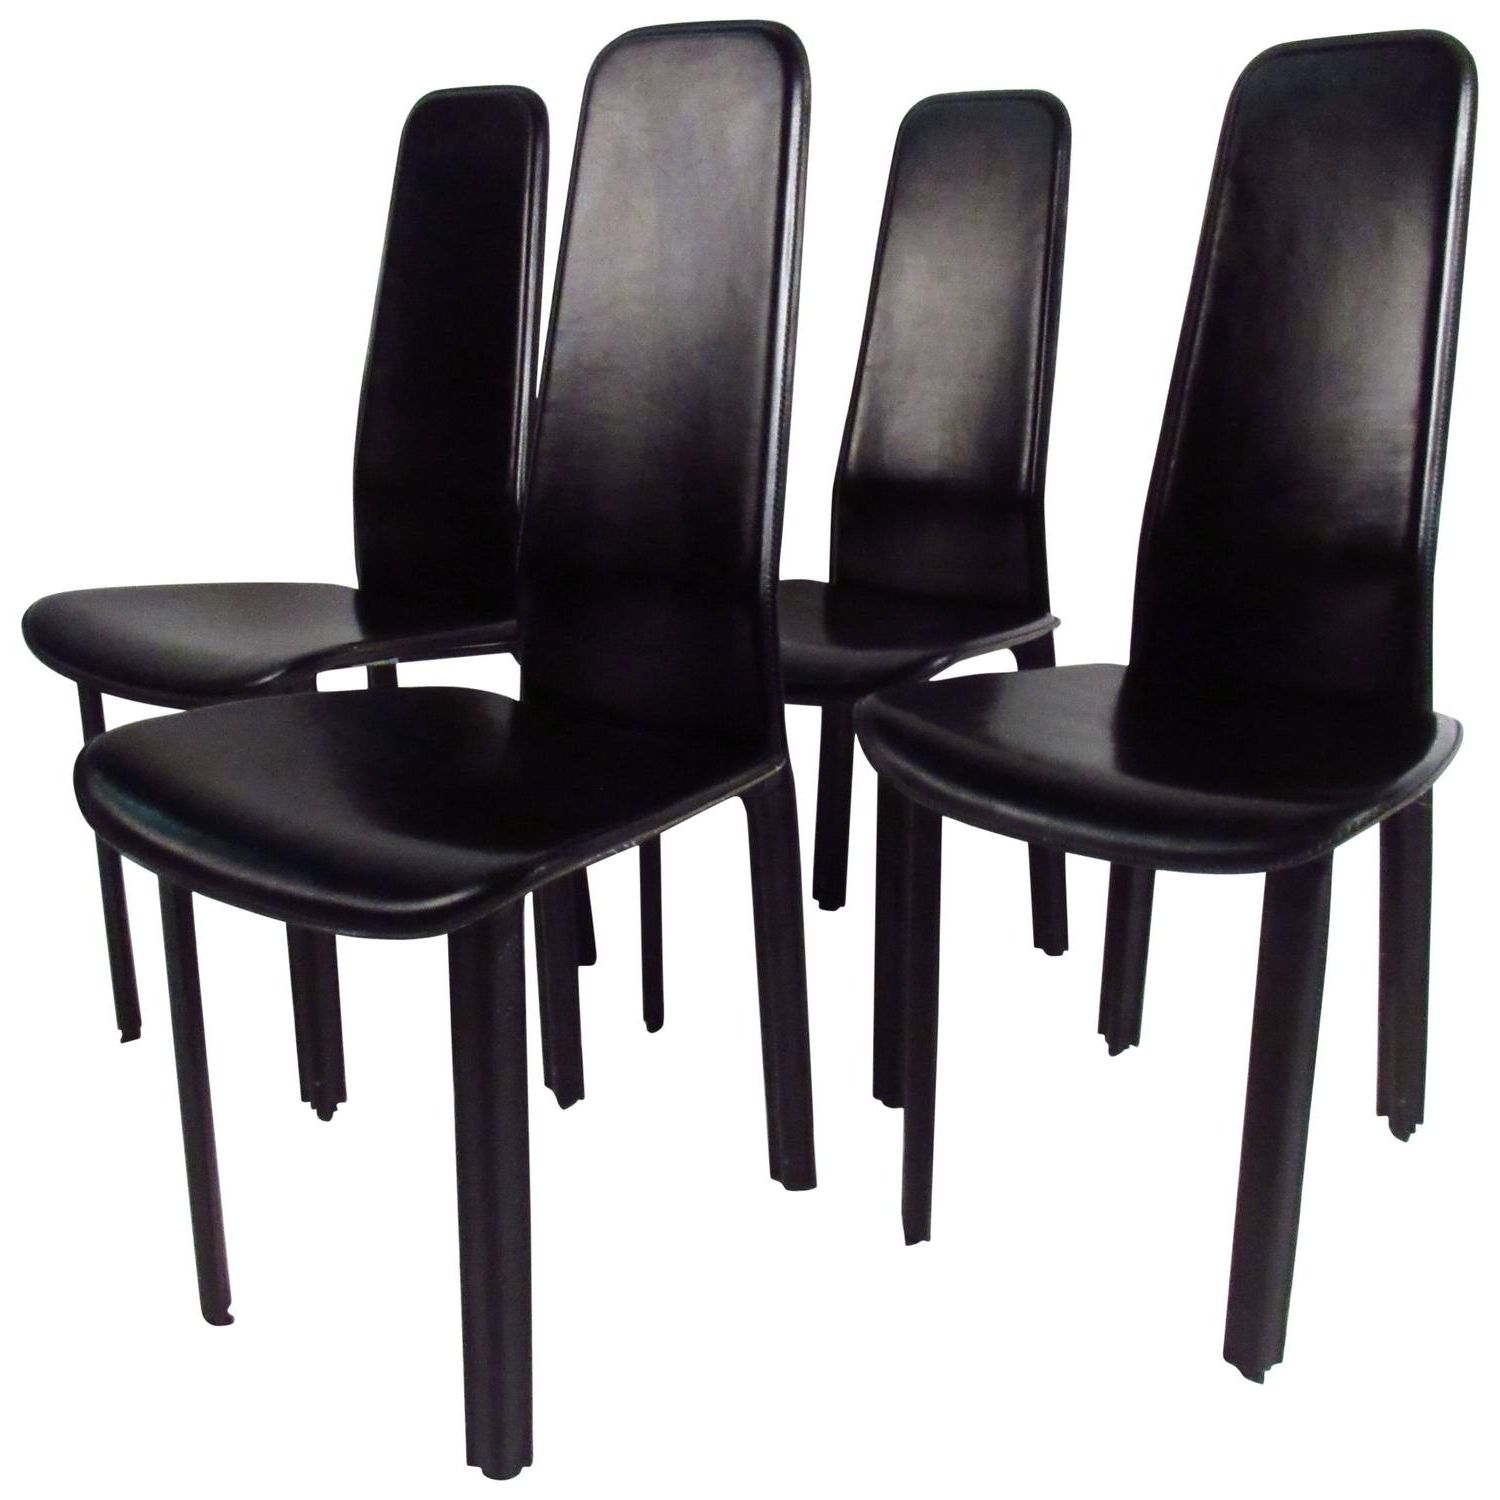 Widely Used High Back Dining Chairs With Set Of Italian Leather High Back Dining Chairscidue For Sale At (View 2 of 25)